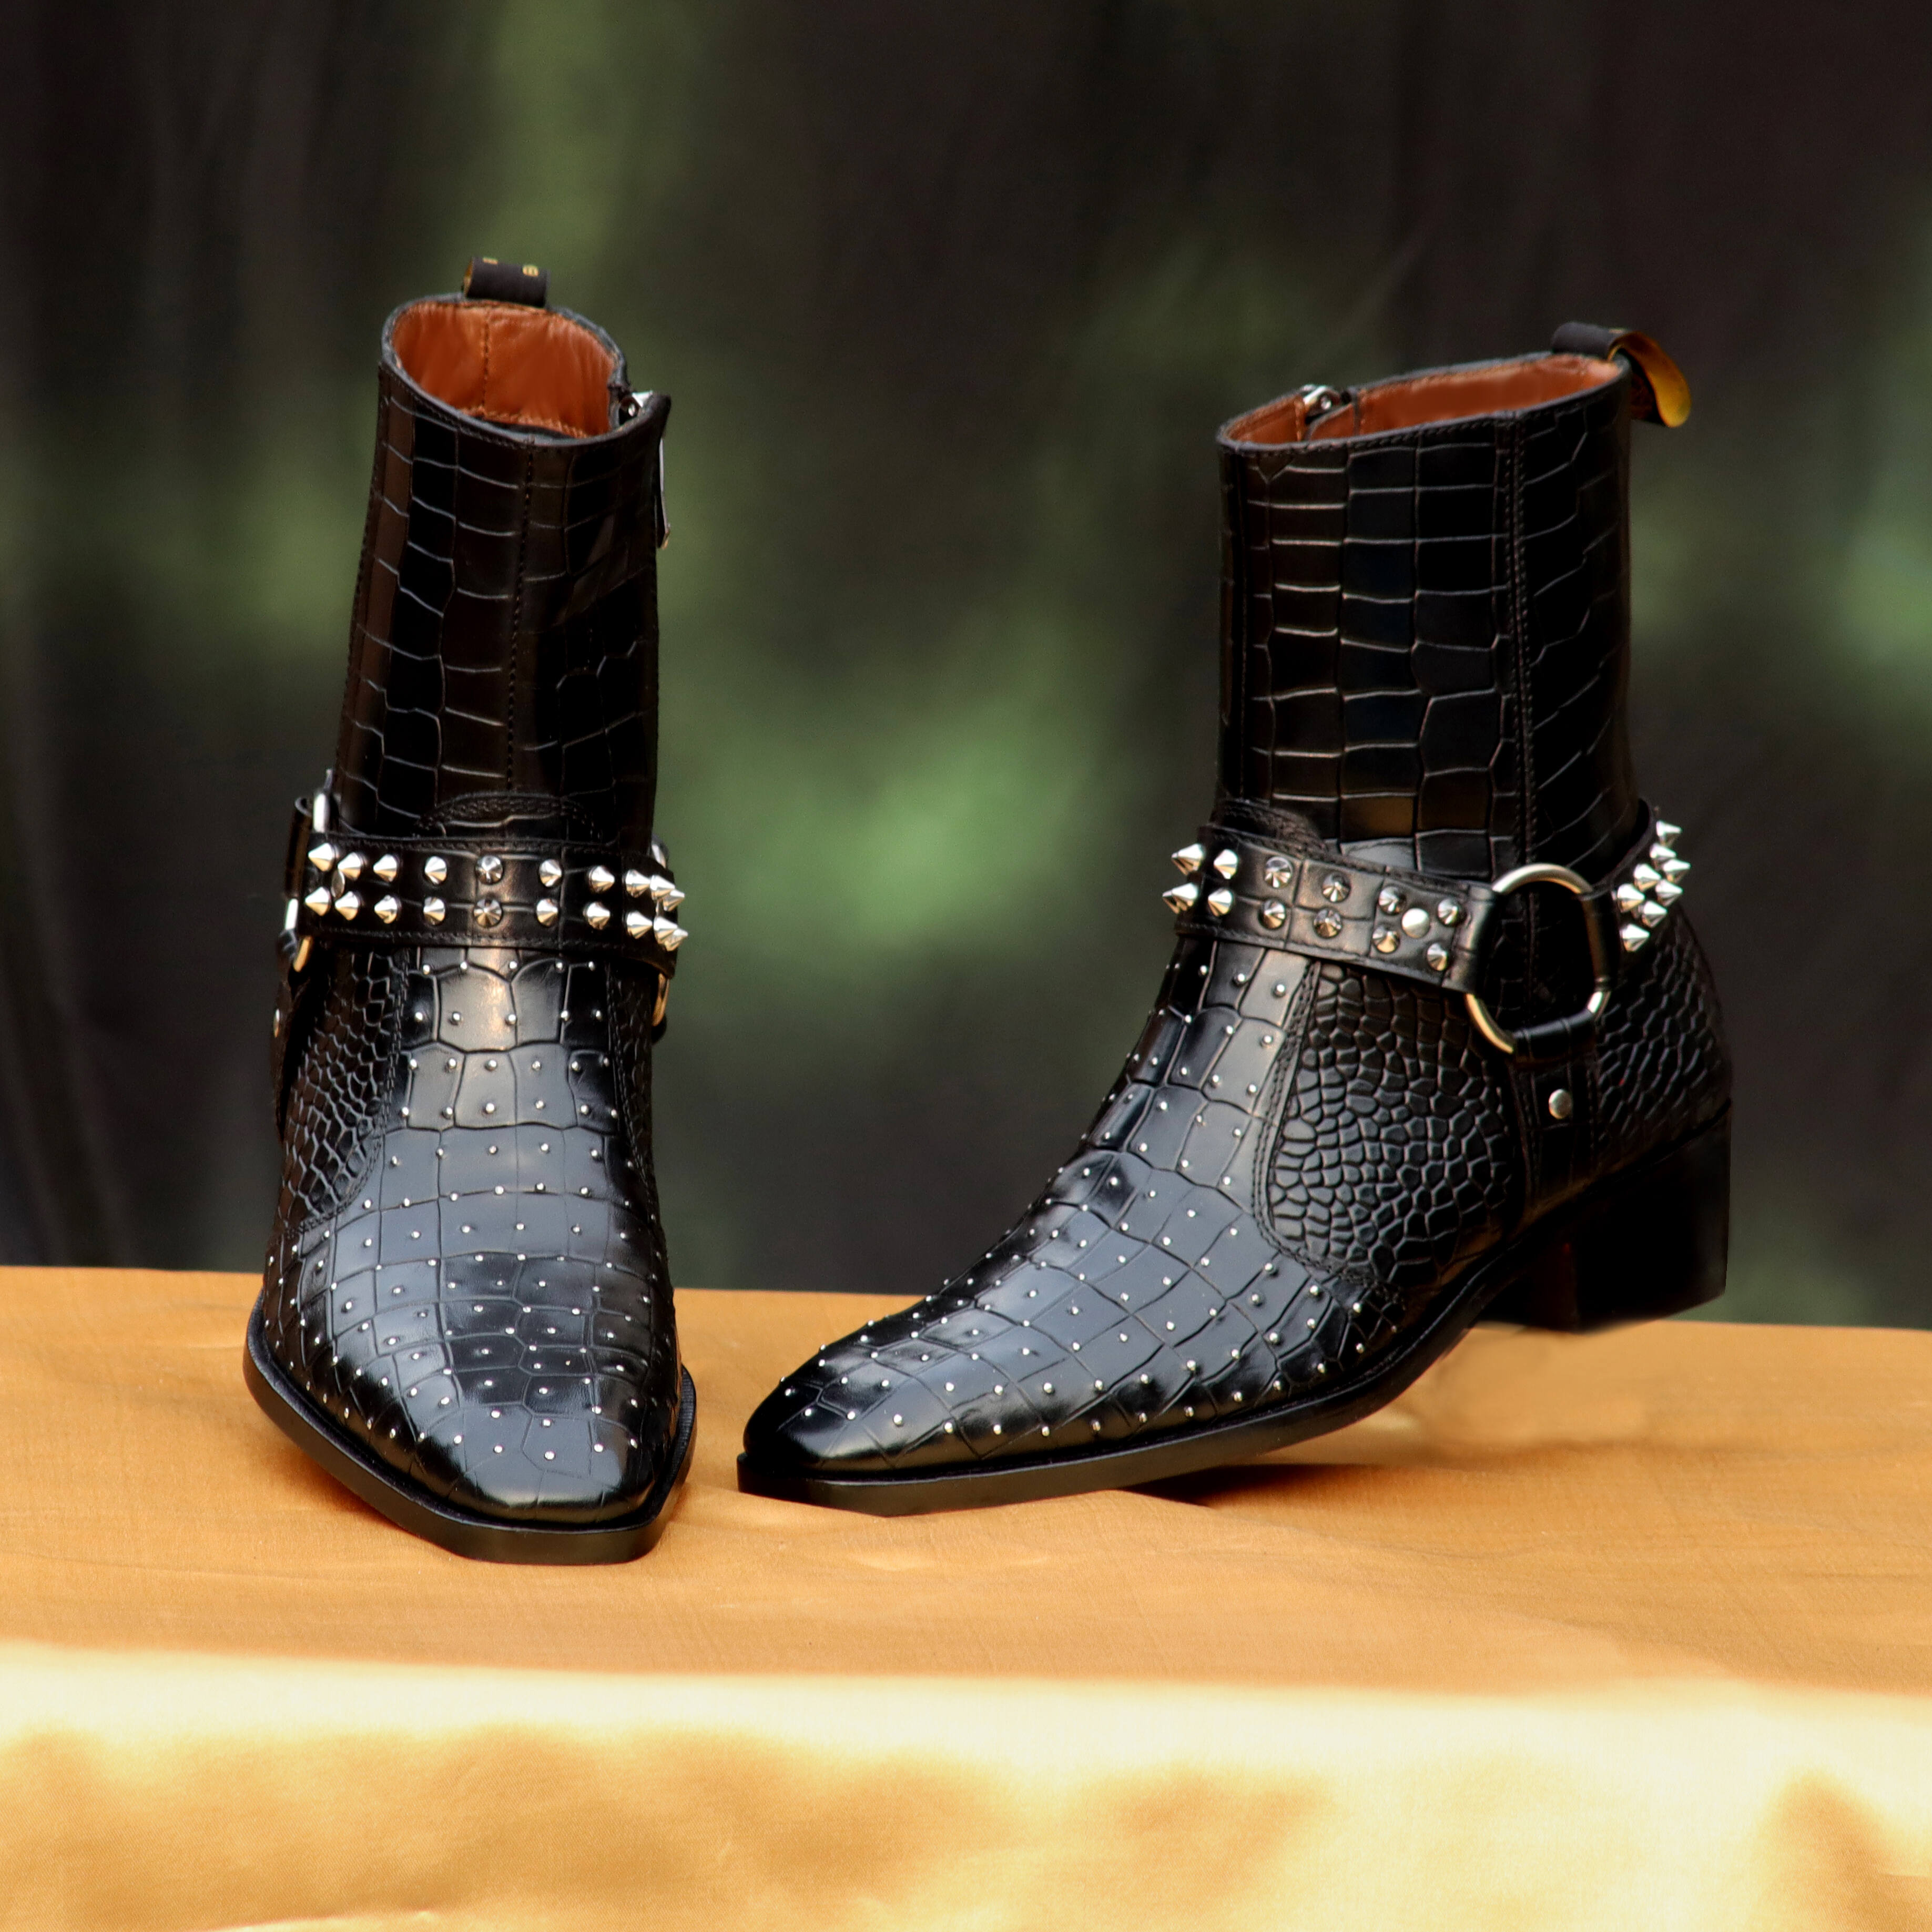 Dapper Cuban Boots with Refined design for your personal style